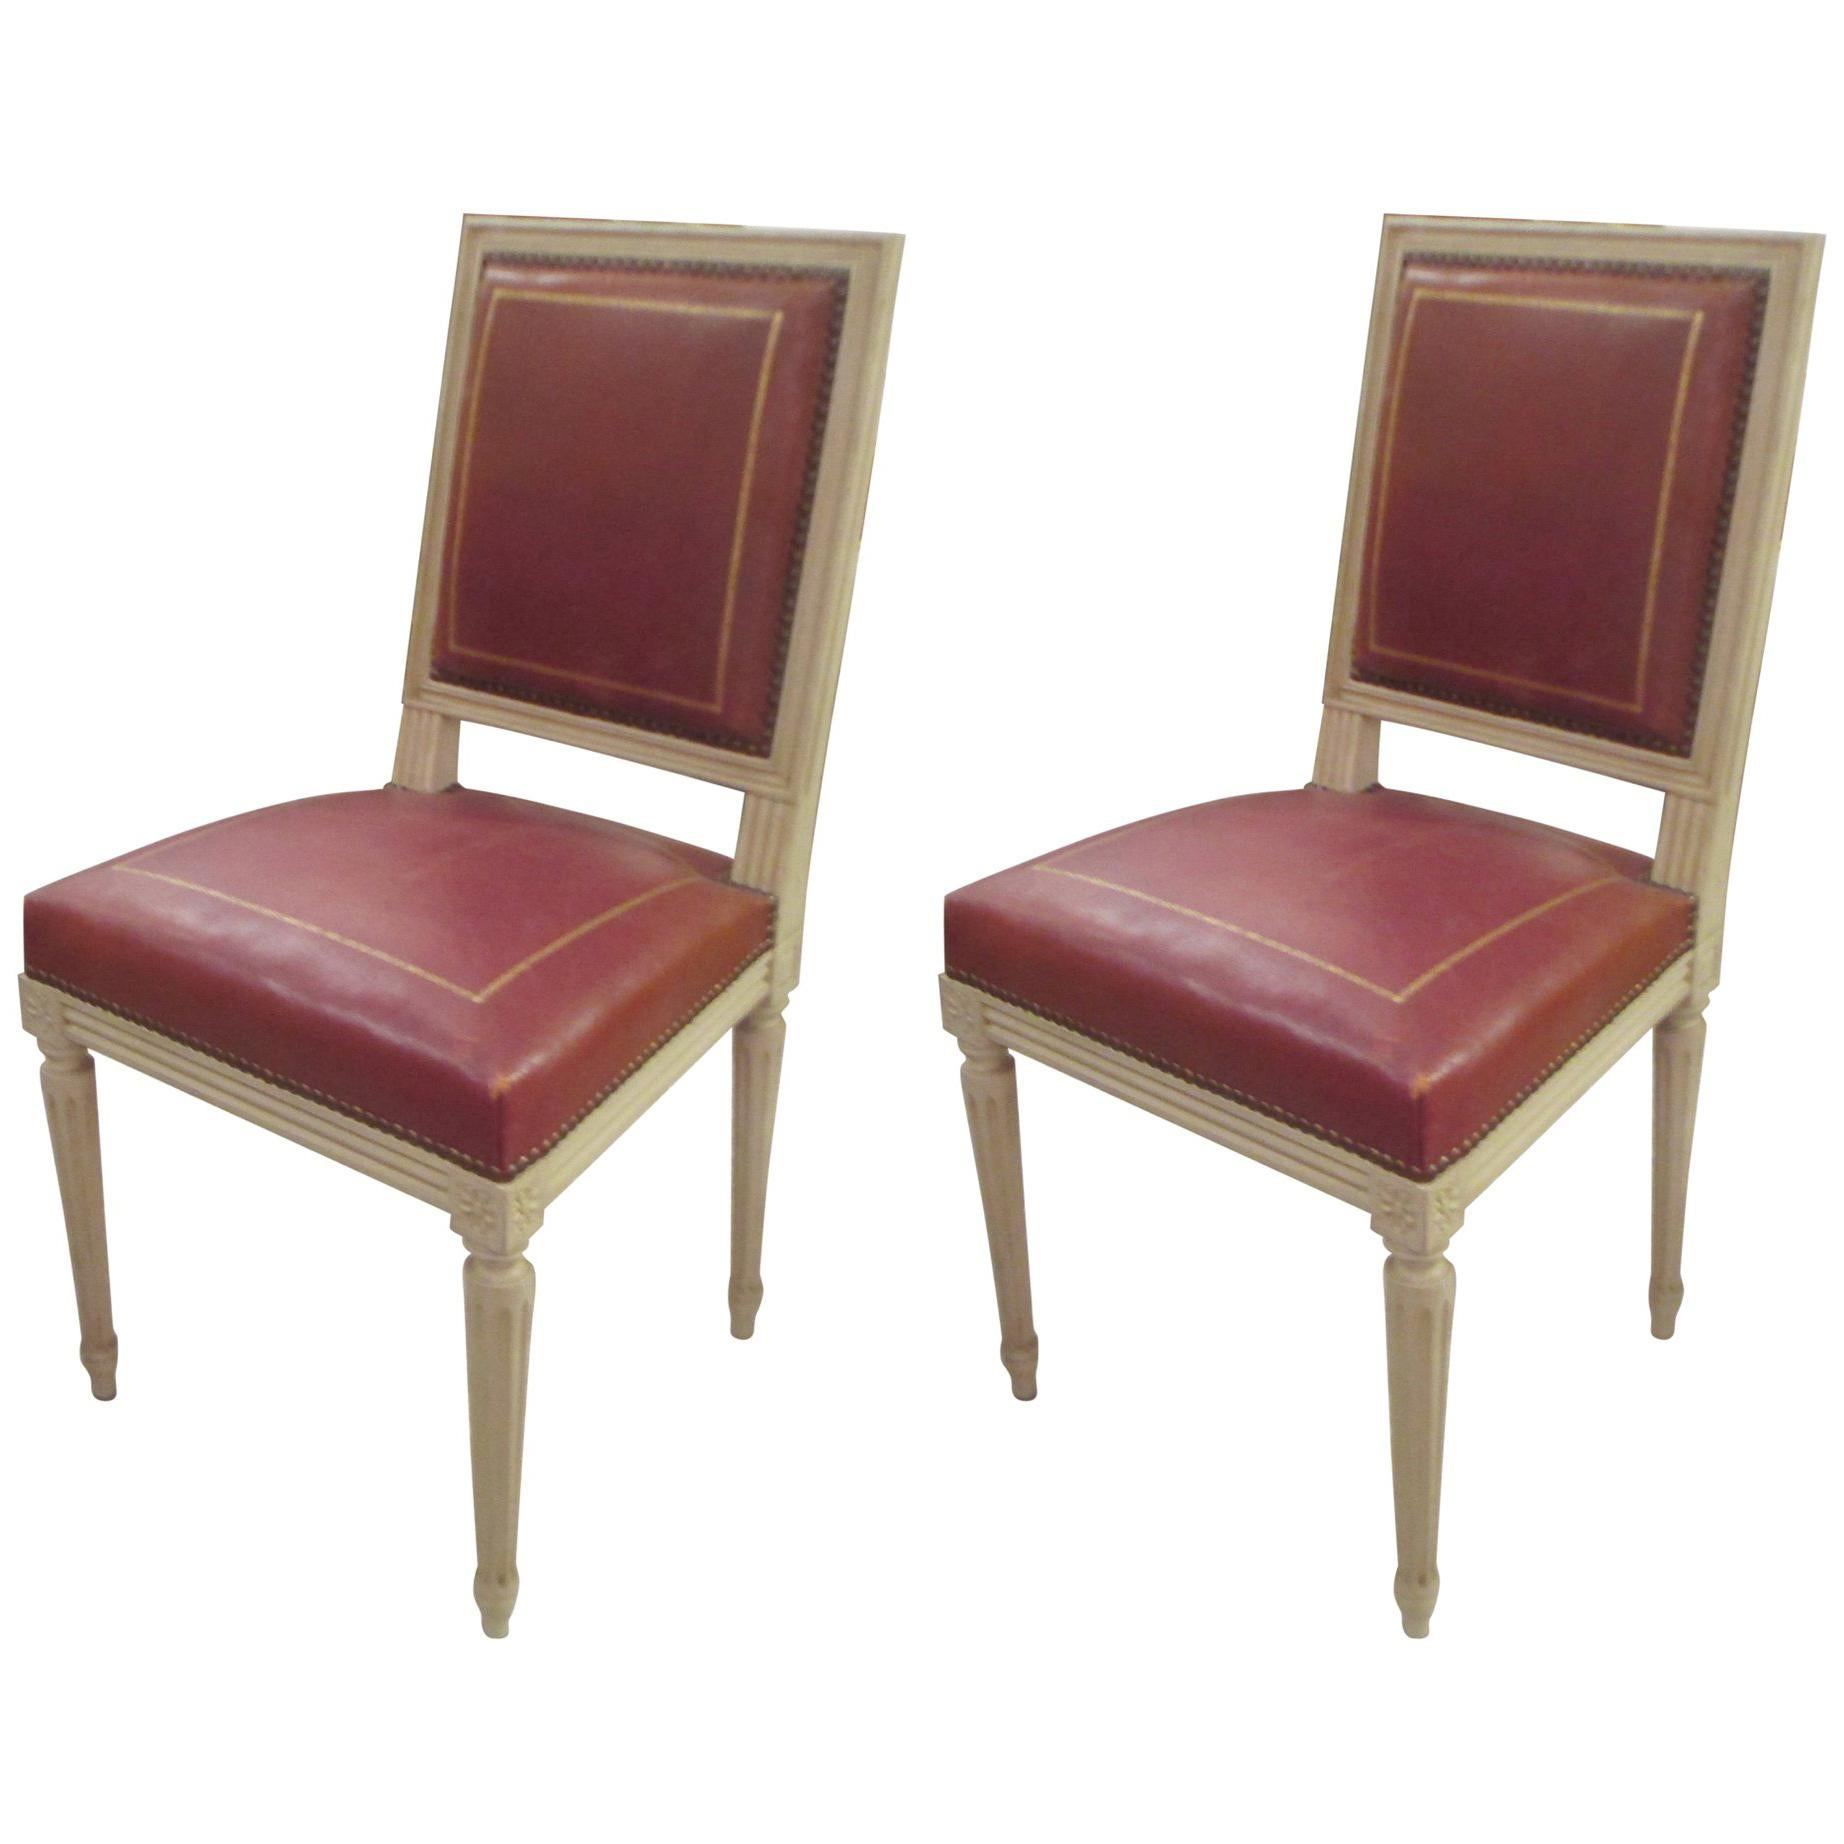 Pair of Louis XVI Style Chairs, Attributed to Maison Jansen